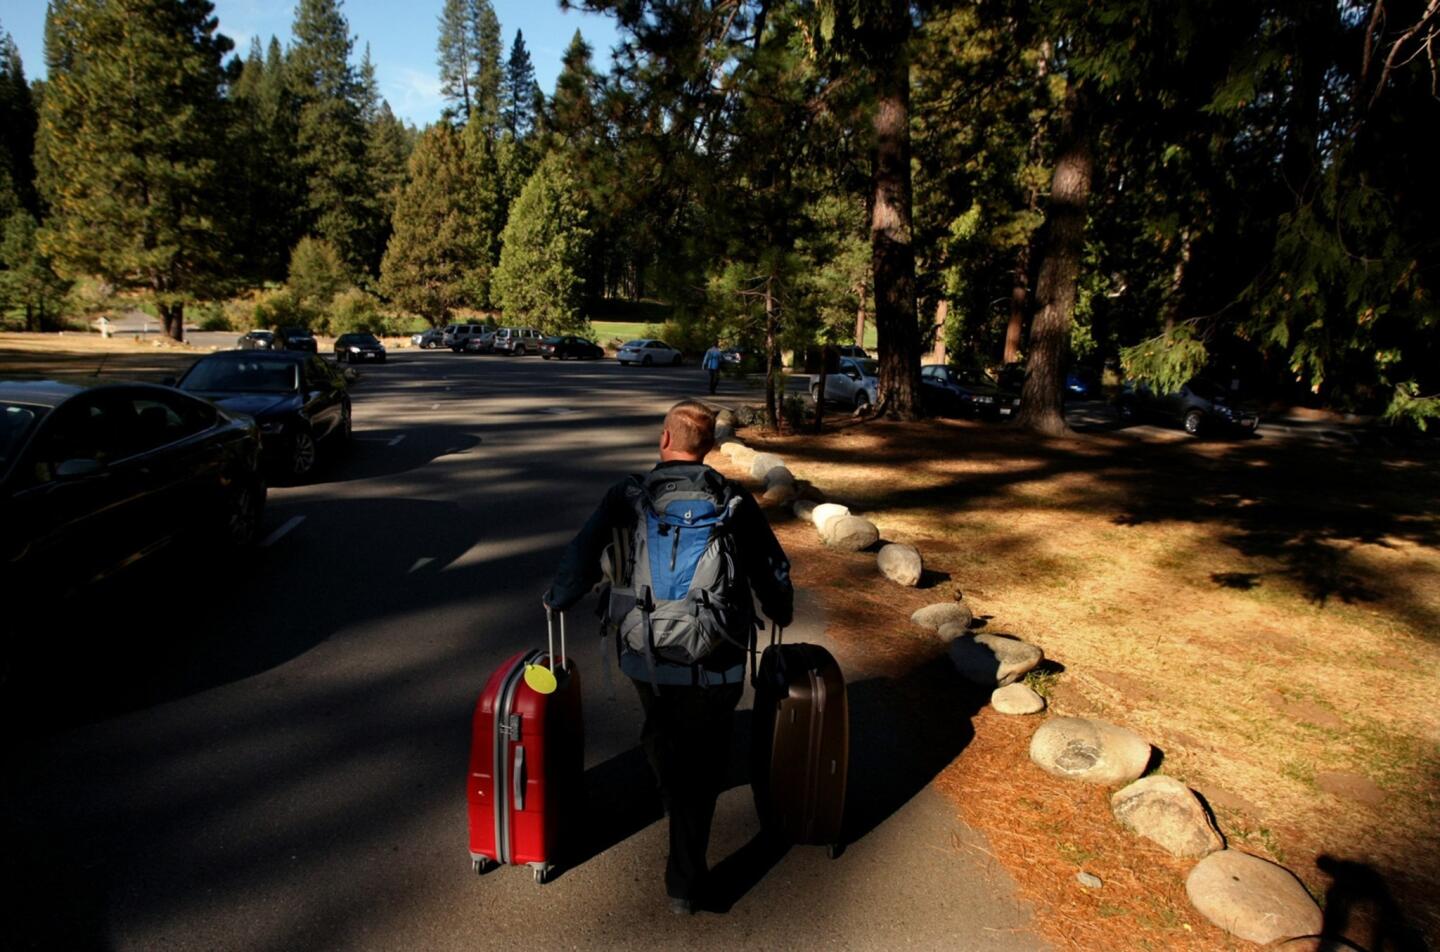 Bastian Ziegler, a Yosemite visitor from Stuttgart, Germany, leaves the Wawona Hotel on Wednesday. Campground and hotel reservations inside the national park were no longer being honored because of the national park's closure; visitors were issued refunds and told they could no longer enter the park.